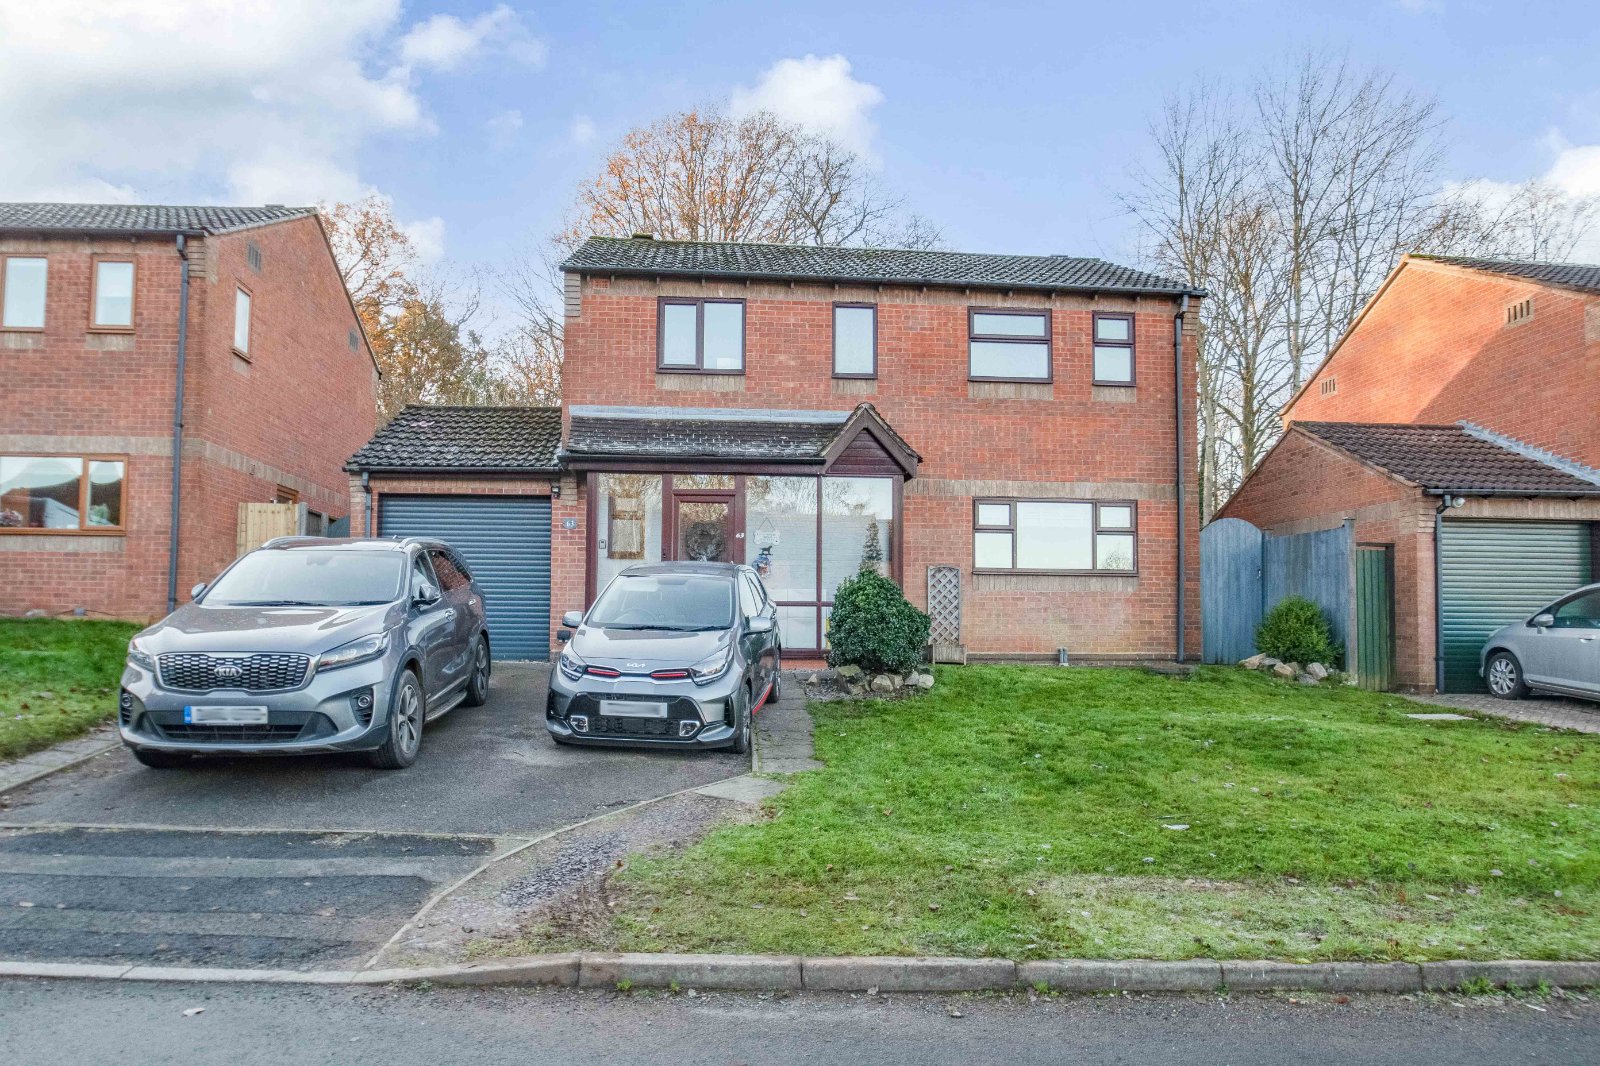 4 bed house for sale in Rockford Close, Oakenshaw South - Property Image 1